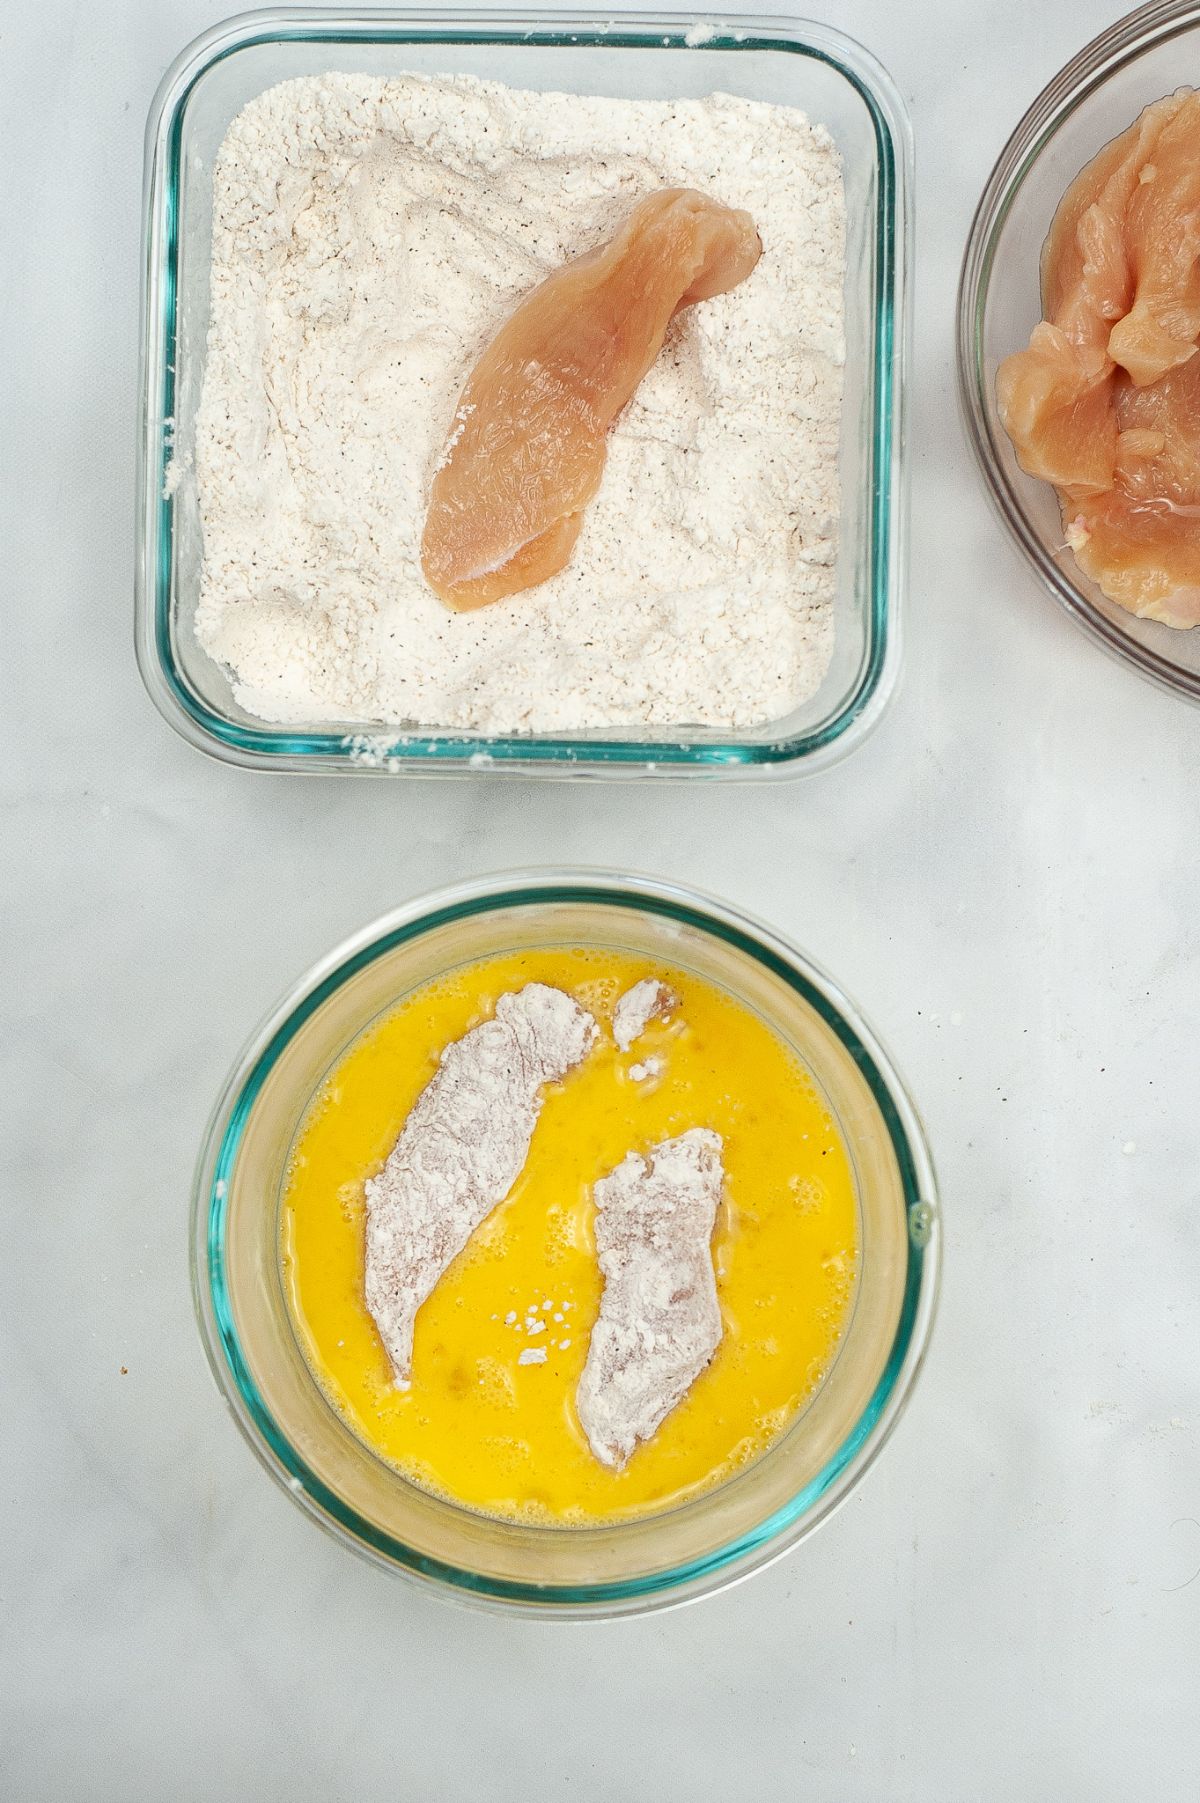 Chicken strips dipped in egg and flour mixture.